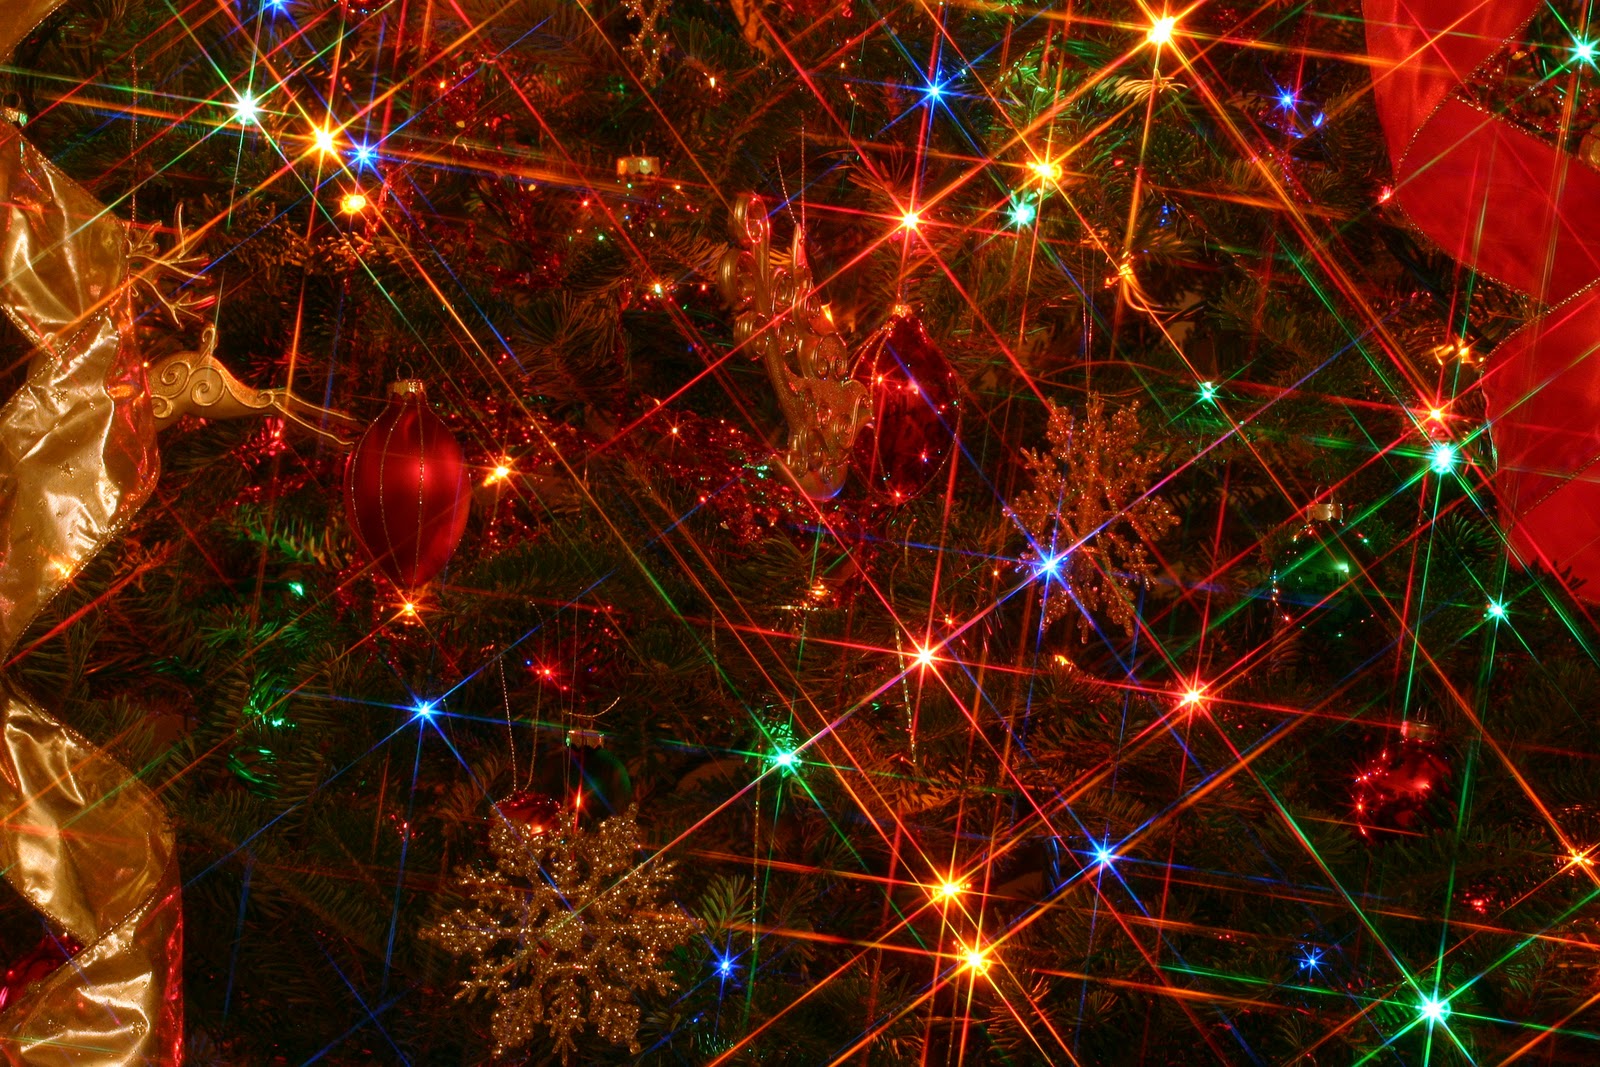 2015 Christmas lights background - wallpapers, images, photos ...